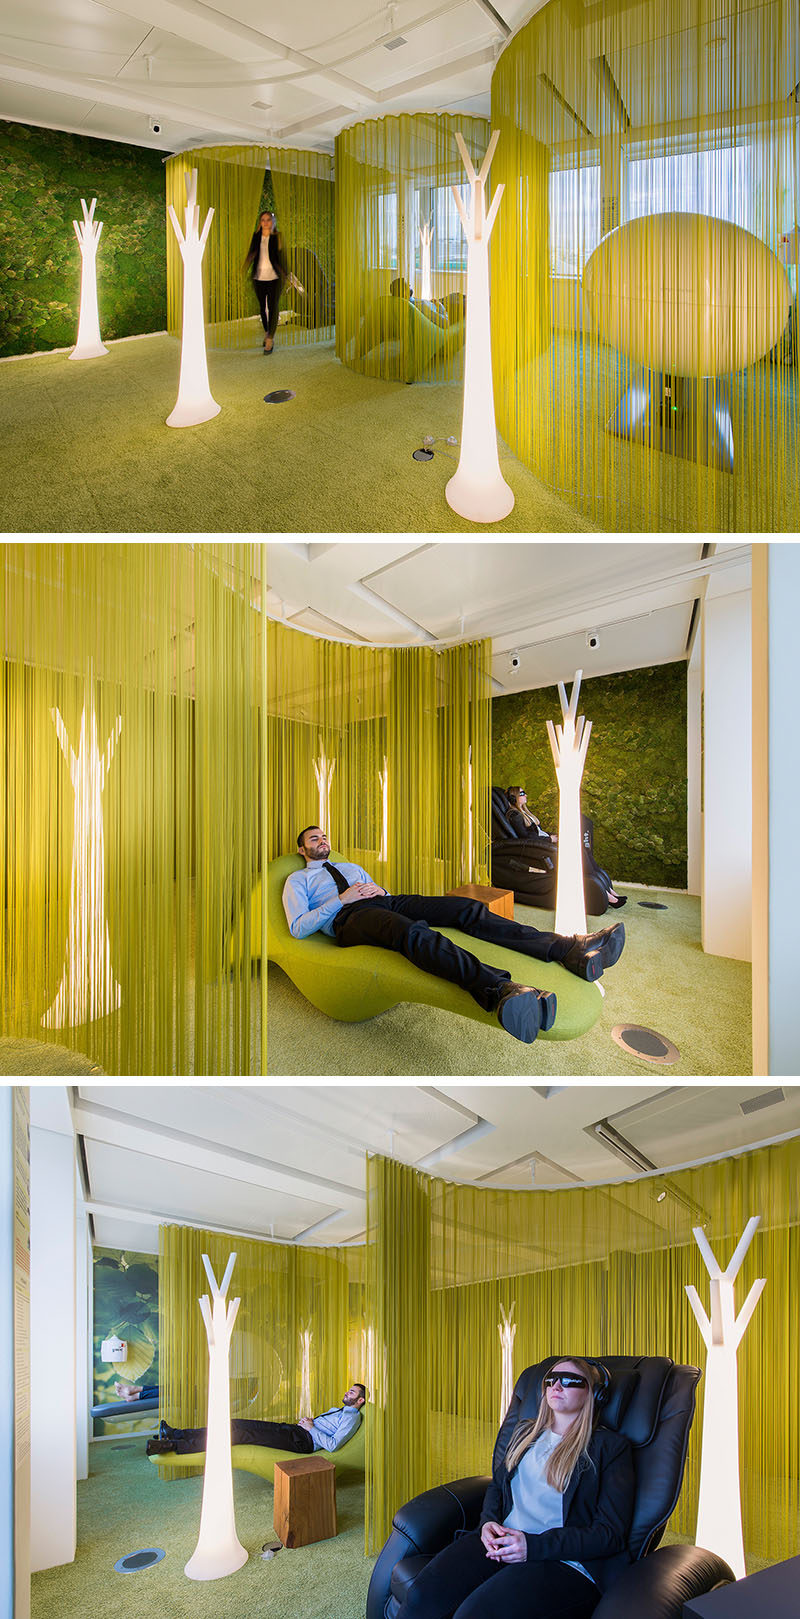 Office Design Inspiration - This Modern Office Has A Lounge Area For Quiet Relaxation